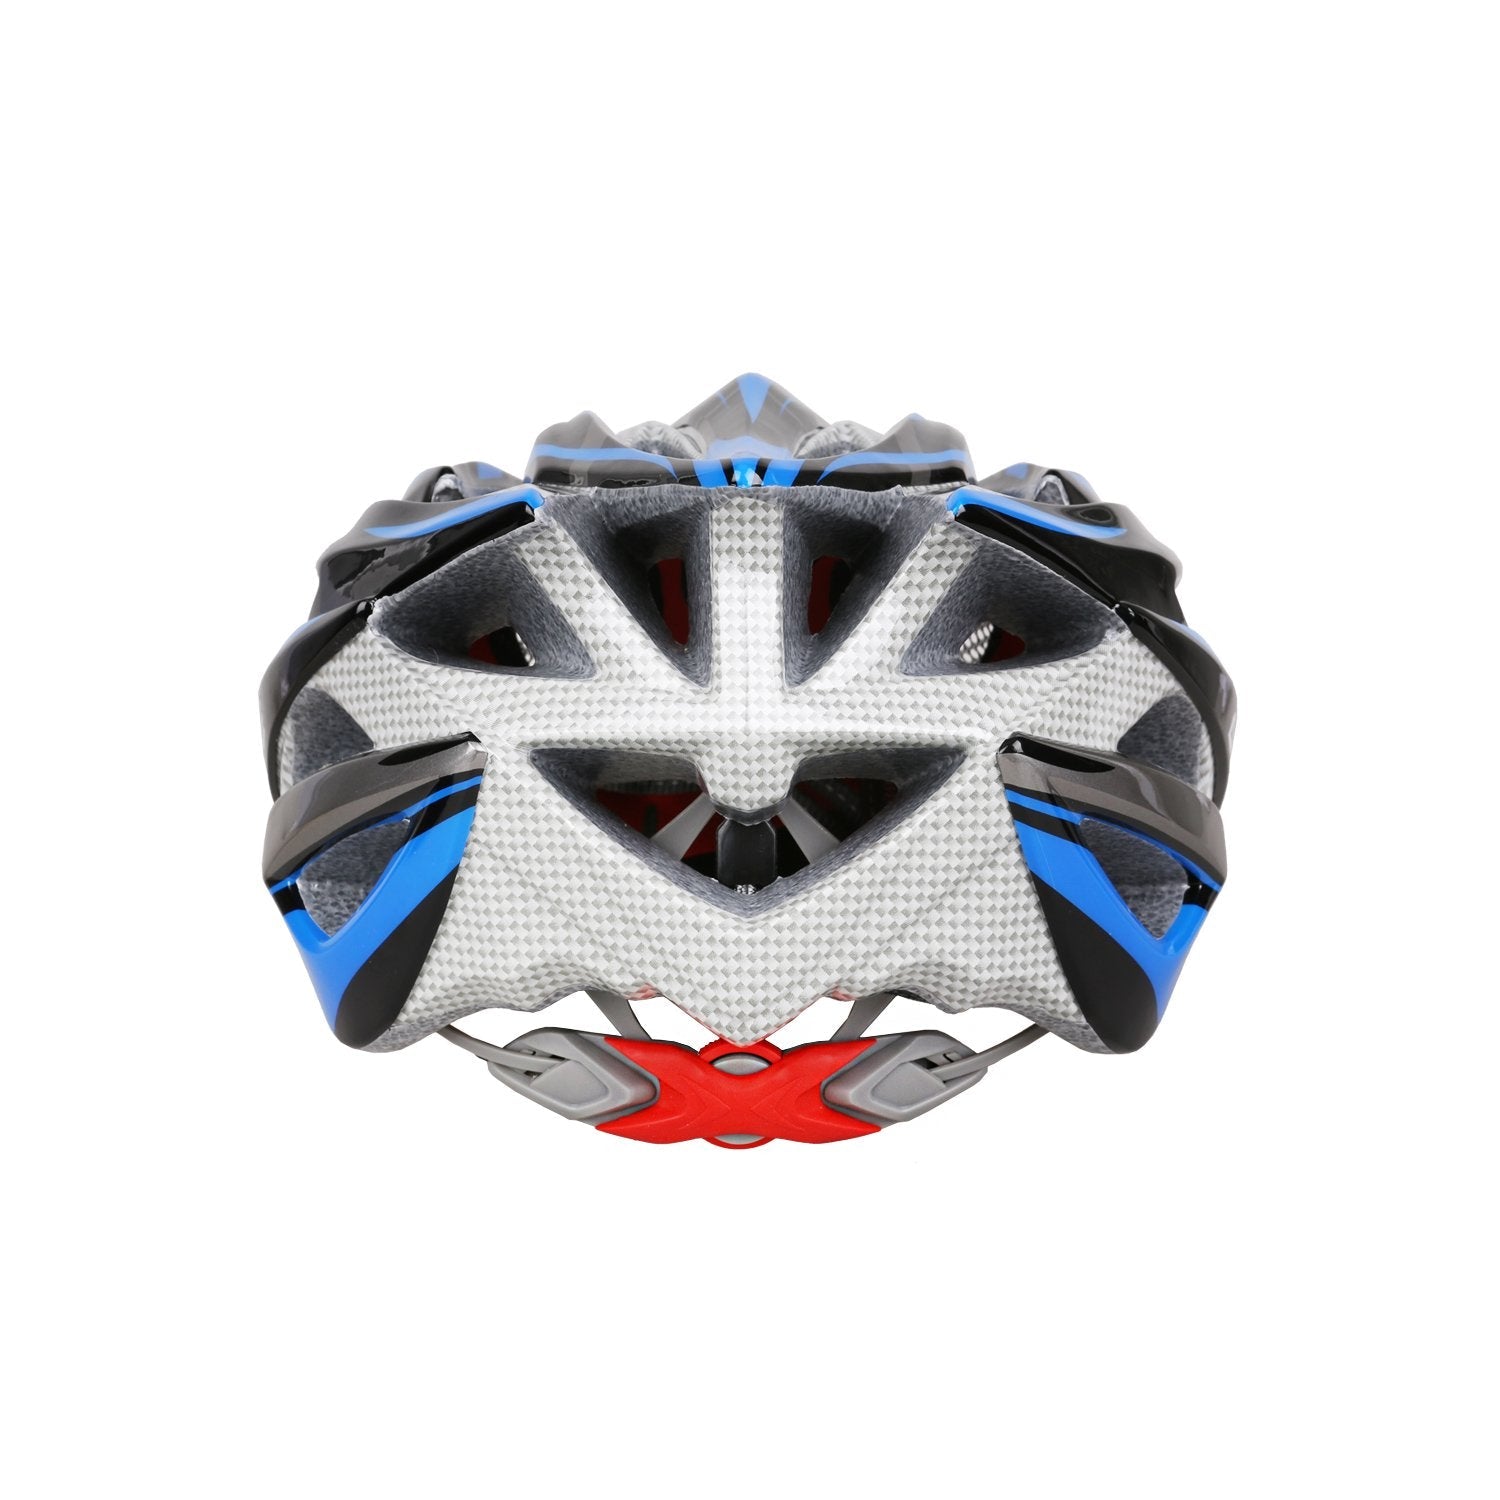 Adsafe CPSC Safety Certified Cycling Bike Helmet w/Safety Vents - Upzy.com